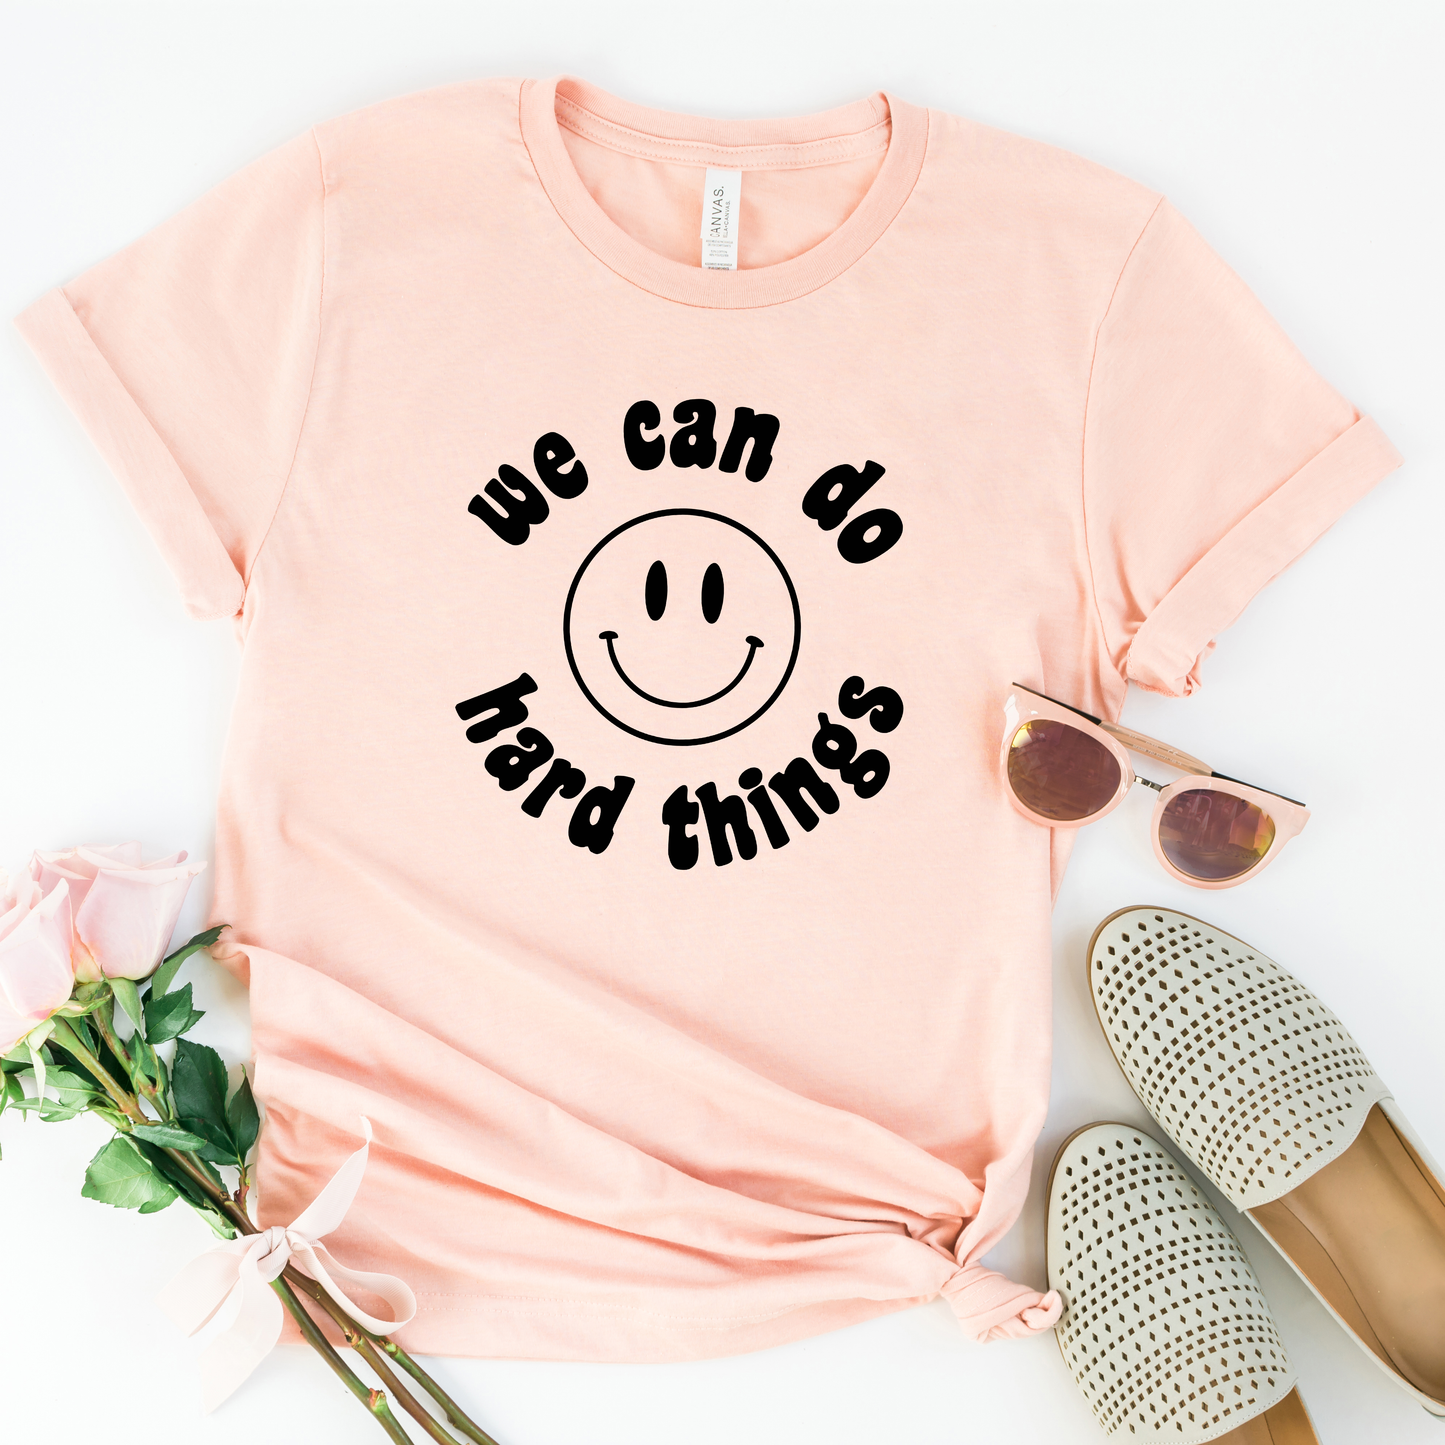 We Can Do Hard Things Smiley Face | Short Sleeve Crew Neck